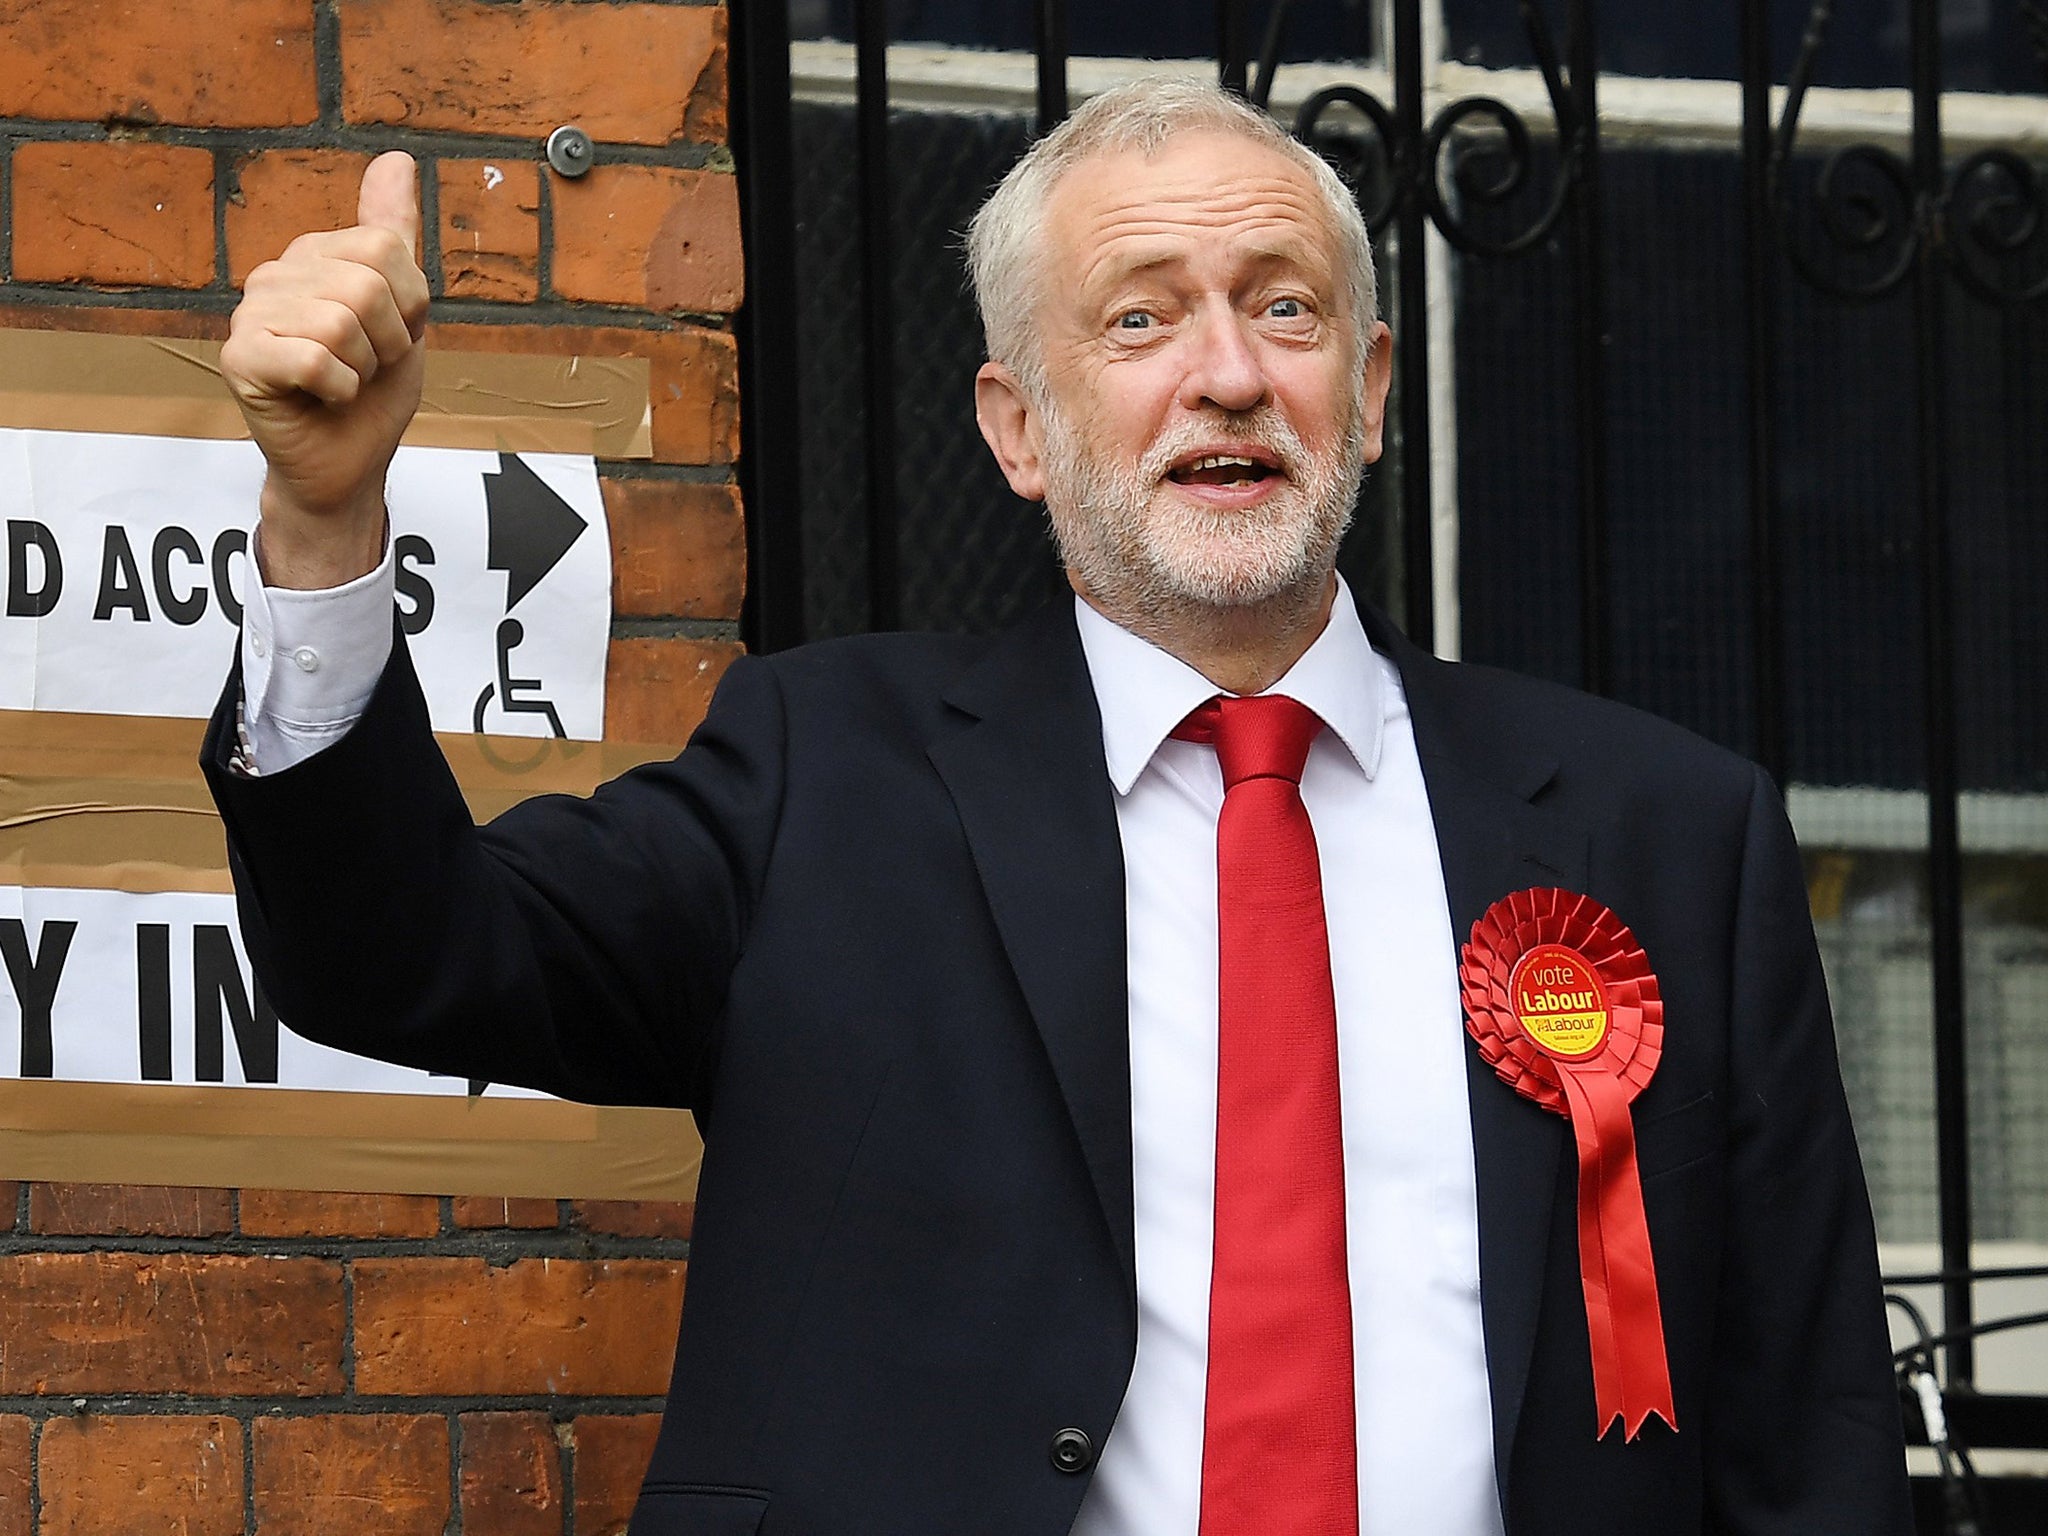 Jeremy Corbyn looks set to have exceeded expectations, with Labour forecast to have won 266 seats